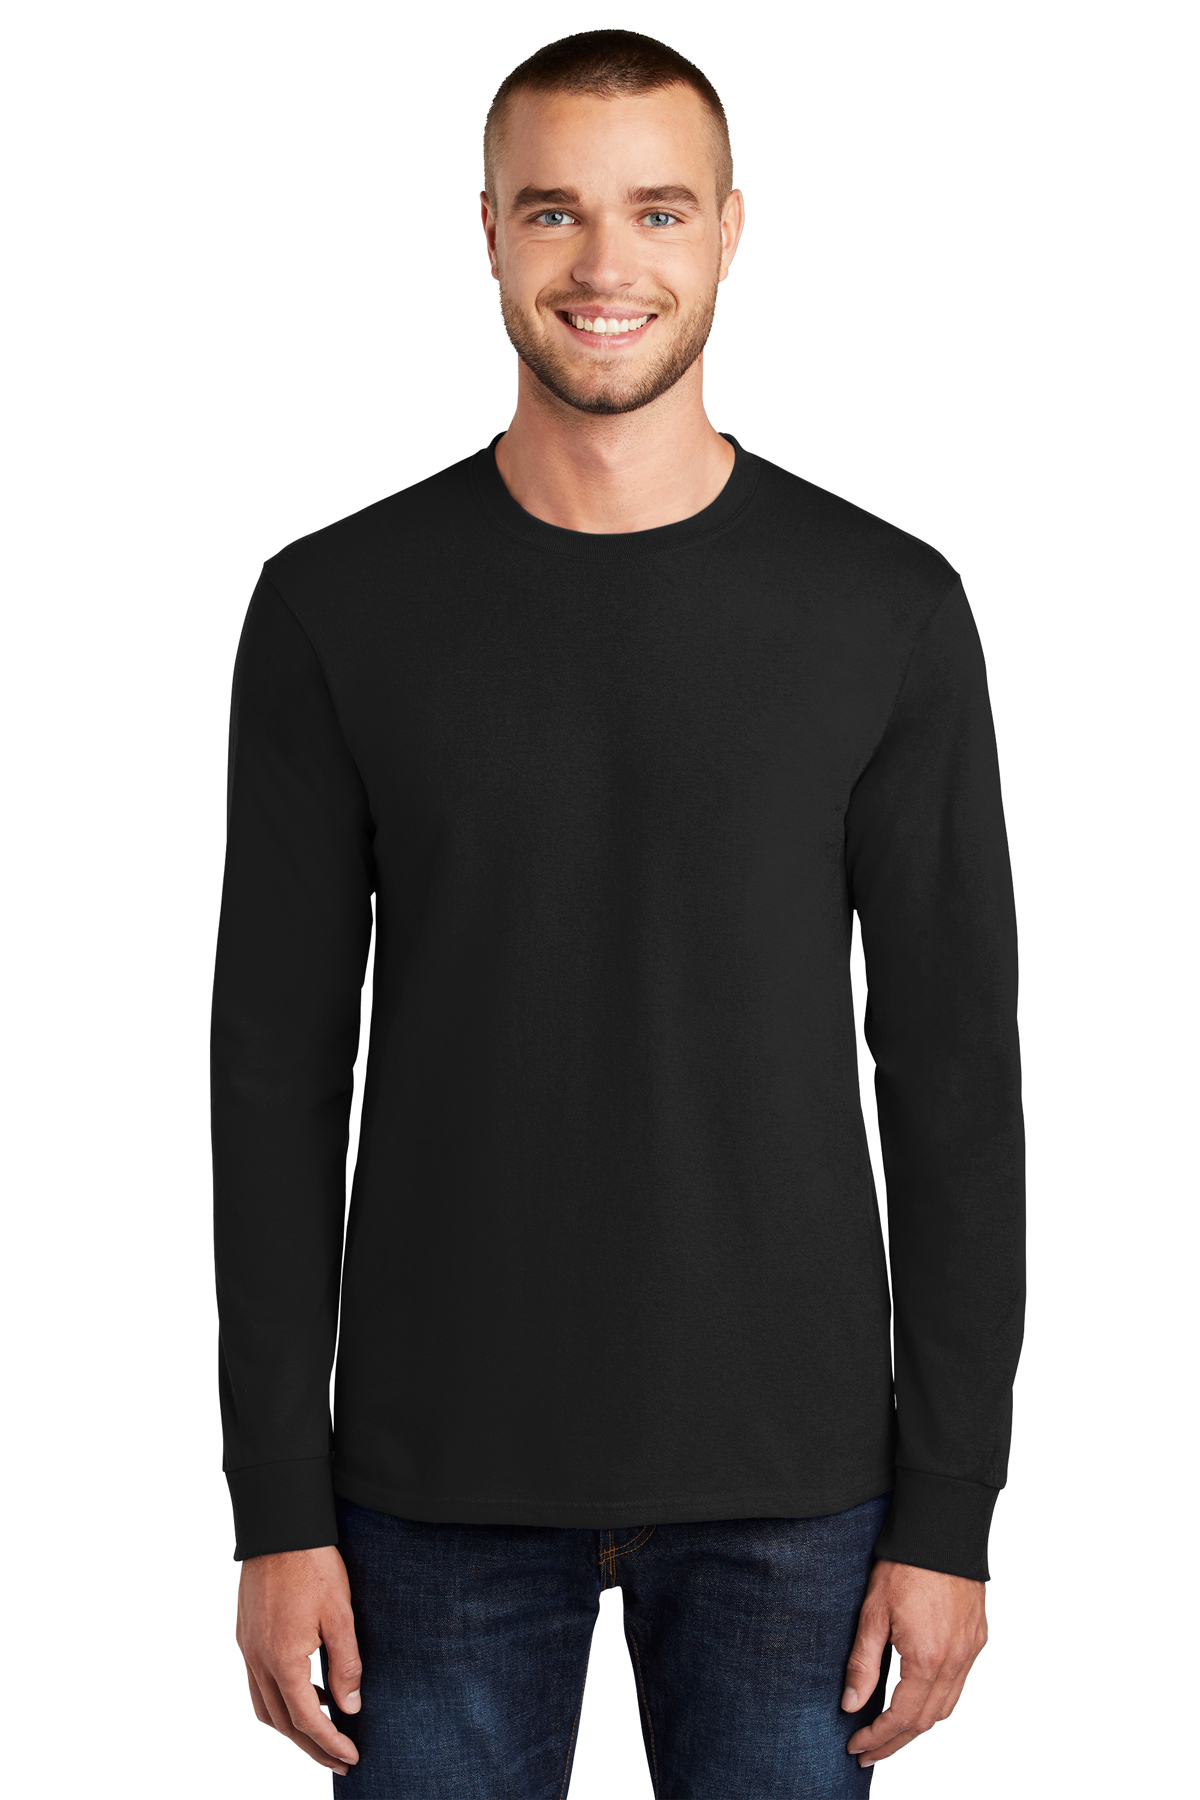 Port & Company Tall Long Sleeve Essential Tee | Product | Company Casuals